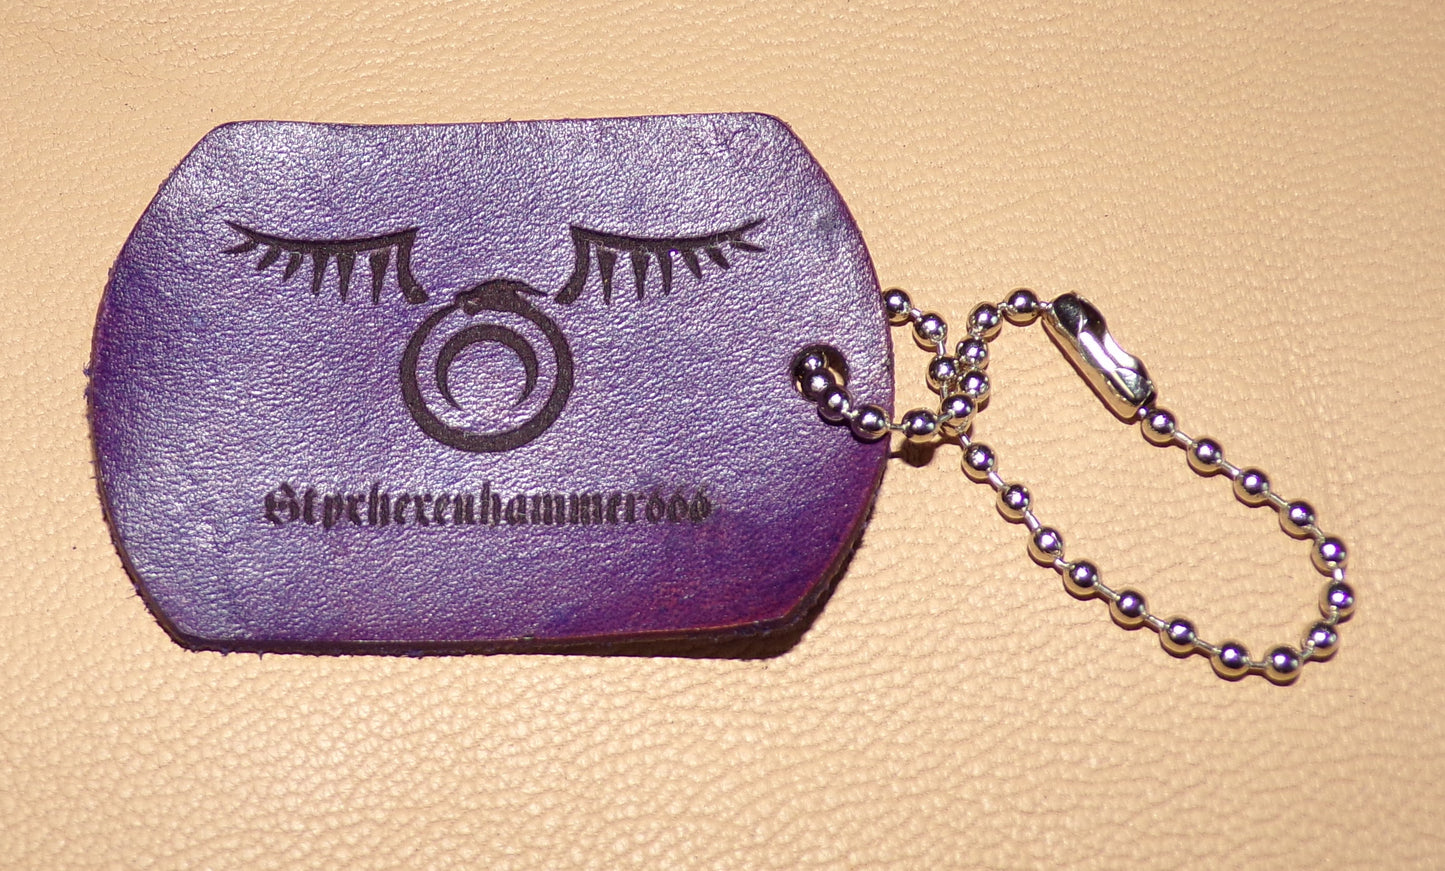 Styx Dog Tag Keychain Purple Leather Large w/Ouroboros with wings